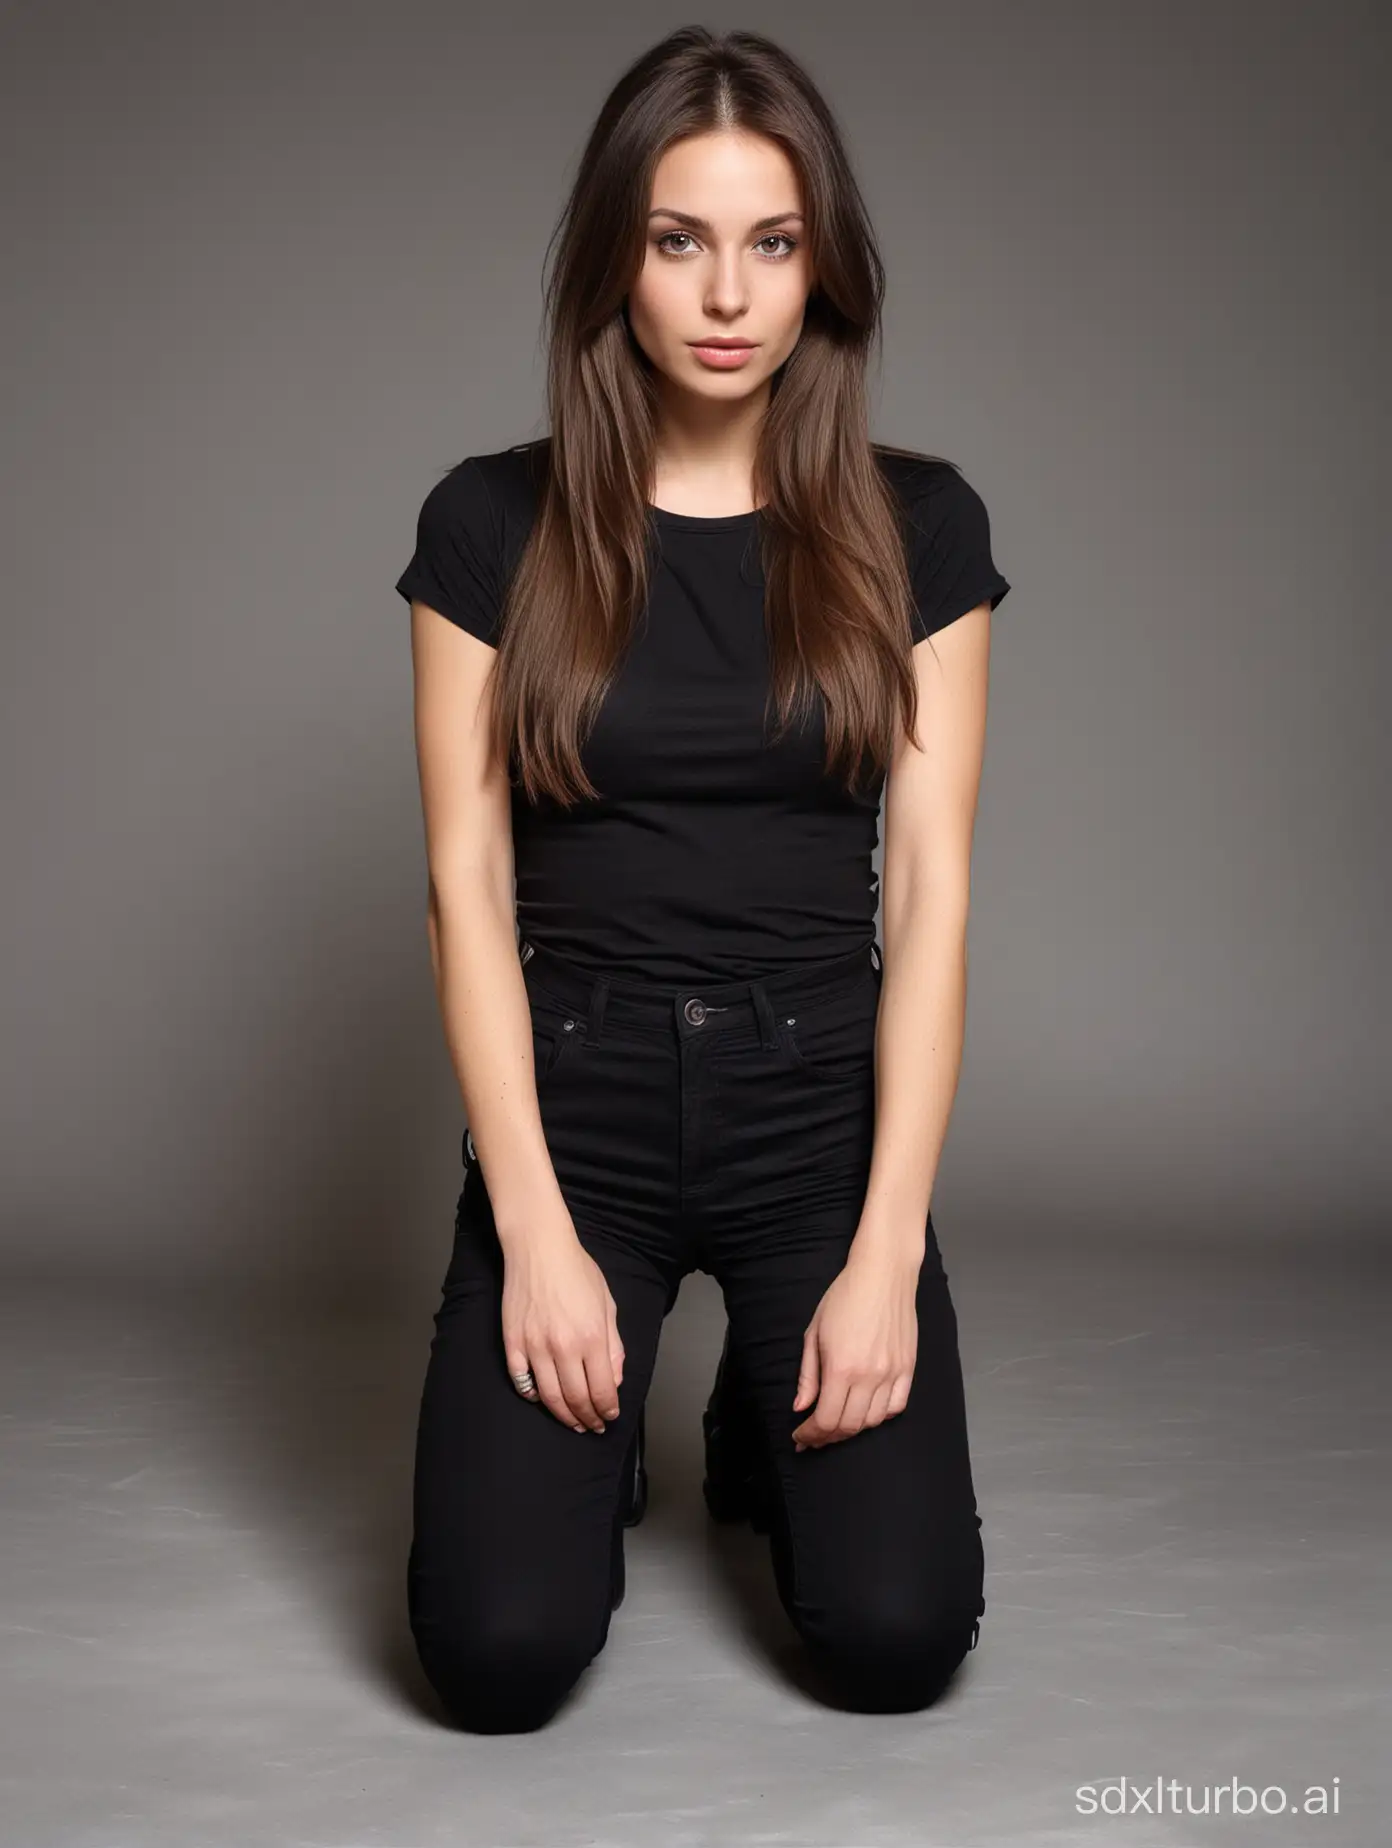 fetal position, , Super delicate photograph, tall brunette Polish girl, she has a long face, square jaw and dimples, full body, (work black pants without pockets), the pants have a slight silky texture, (plain black t-shirt), long straight hair, confident, elegant, slutty, safety boots,